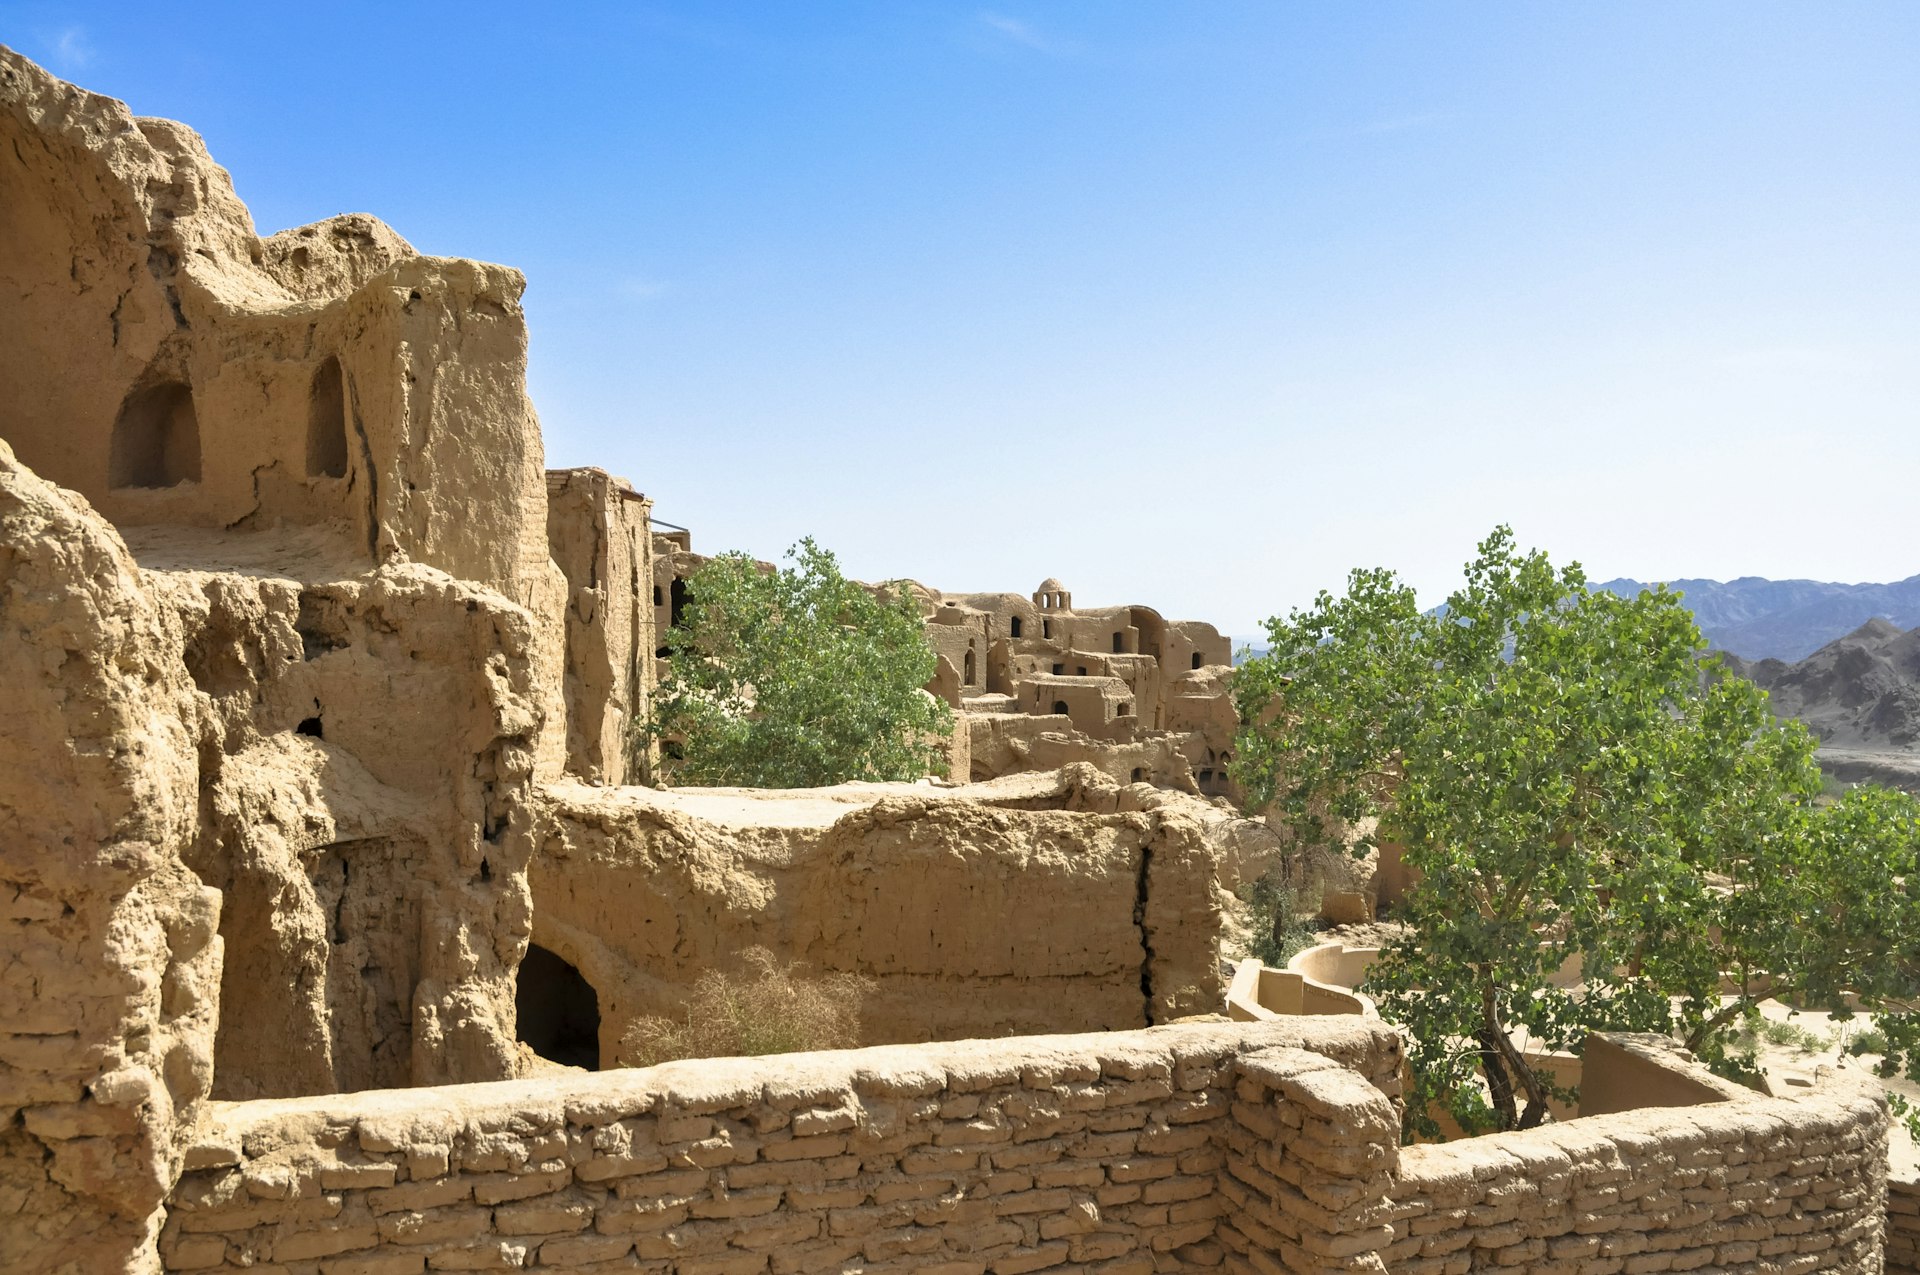 Explore the abandoned mudbrick village of Kharanaq, Iran. Image by Claire Beyer / Lonely Planet